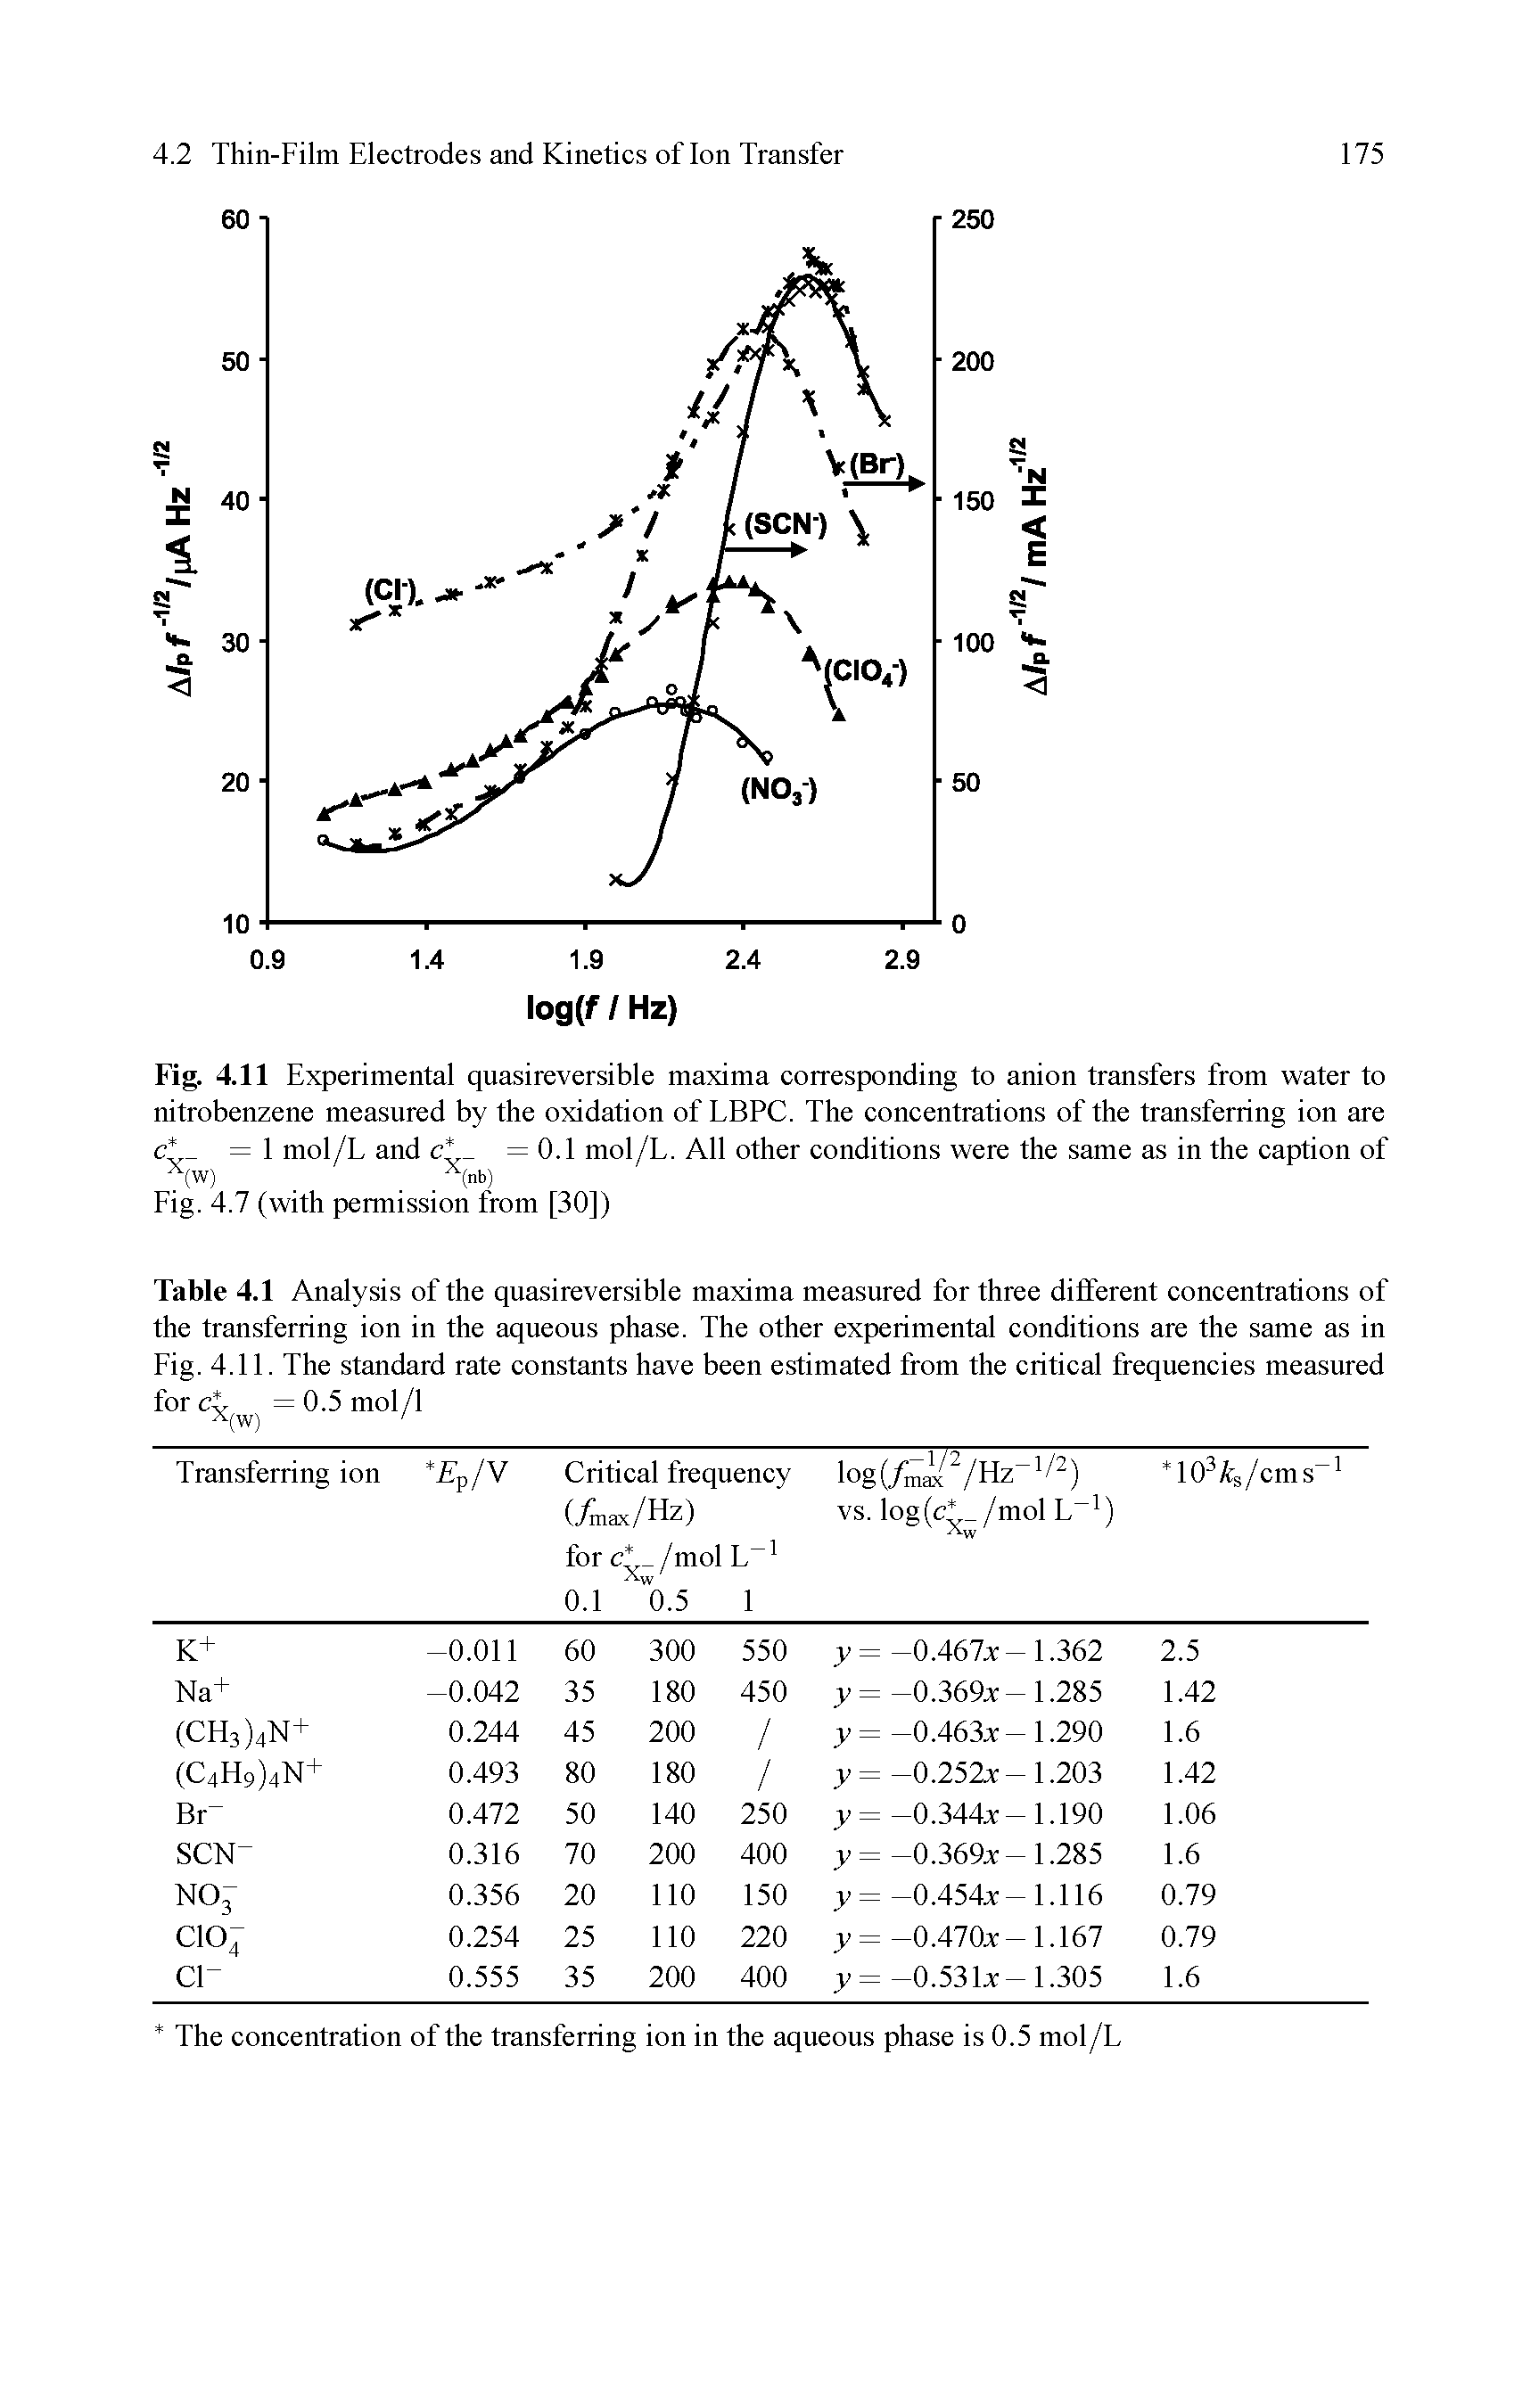 Table 4.1 Analysis of the quasireversible maxima measured for three different concentrations of the transferring ion in the aqueous phase. The other experimental conditions are the same as in Fig. 4.11. The standard rate constants have been estimated from the critical frequencies measured...